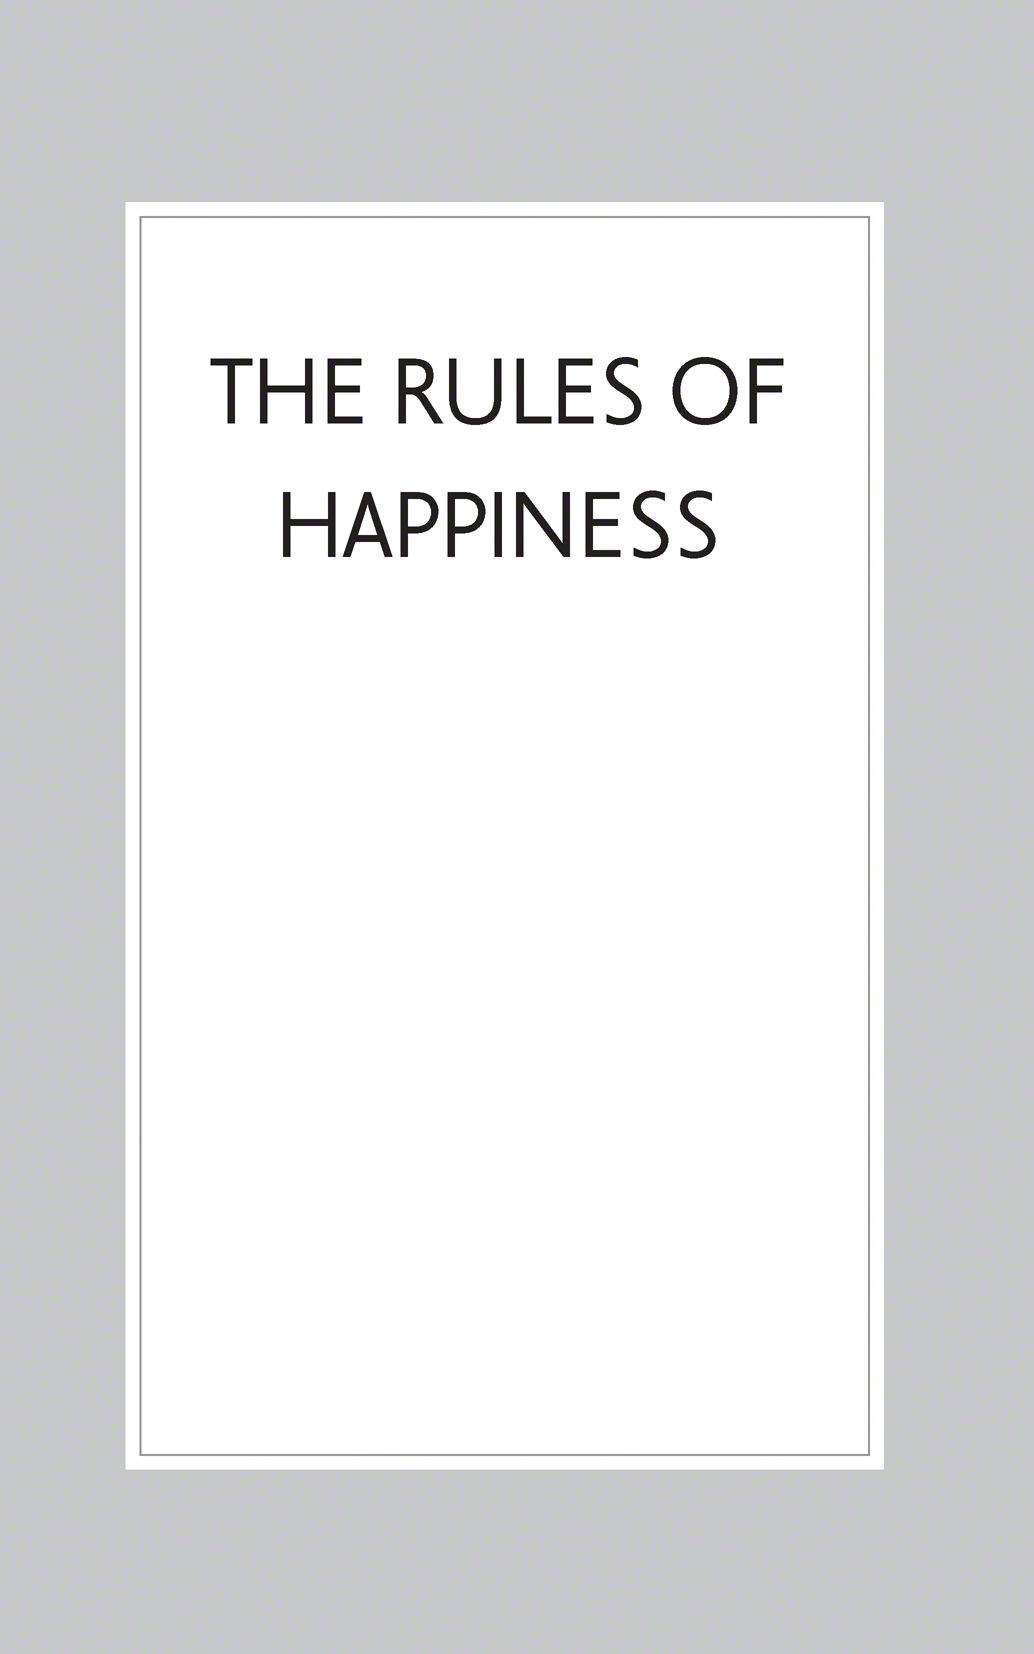 THE RULES OF HAPPINESS